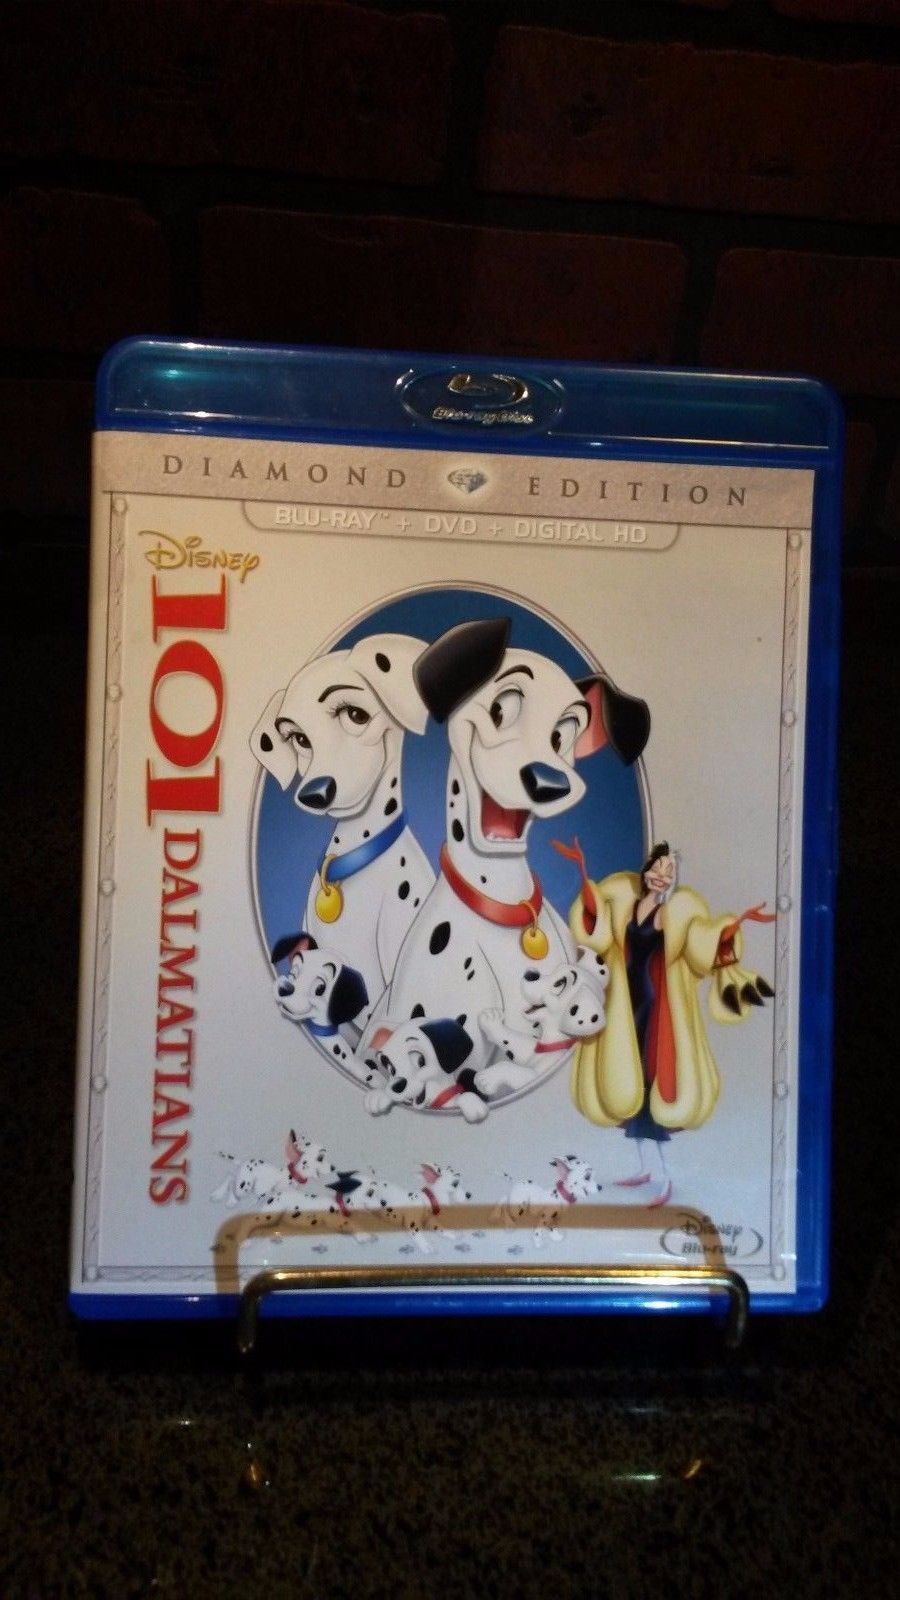 Primary image for 101 DALMATIANS Disney Diamond Edition DVD (only) w/Authentic Slipcase